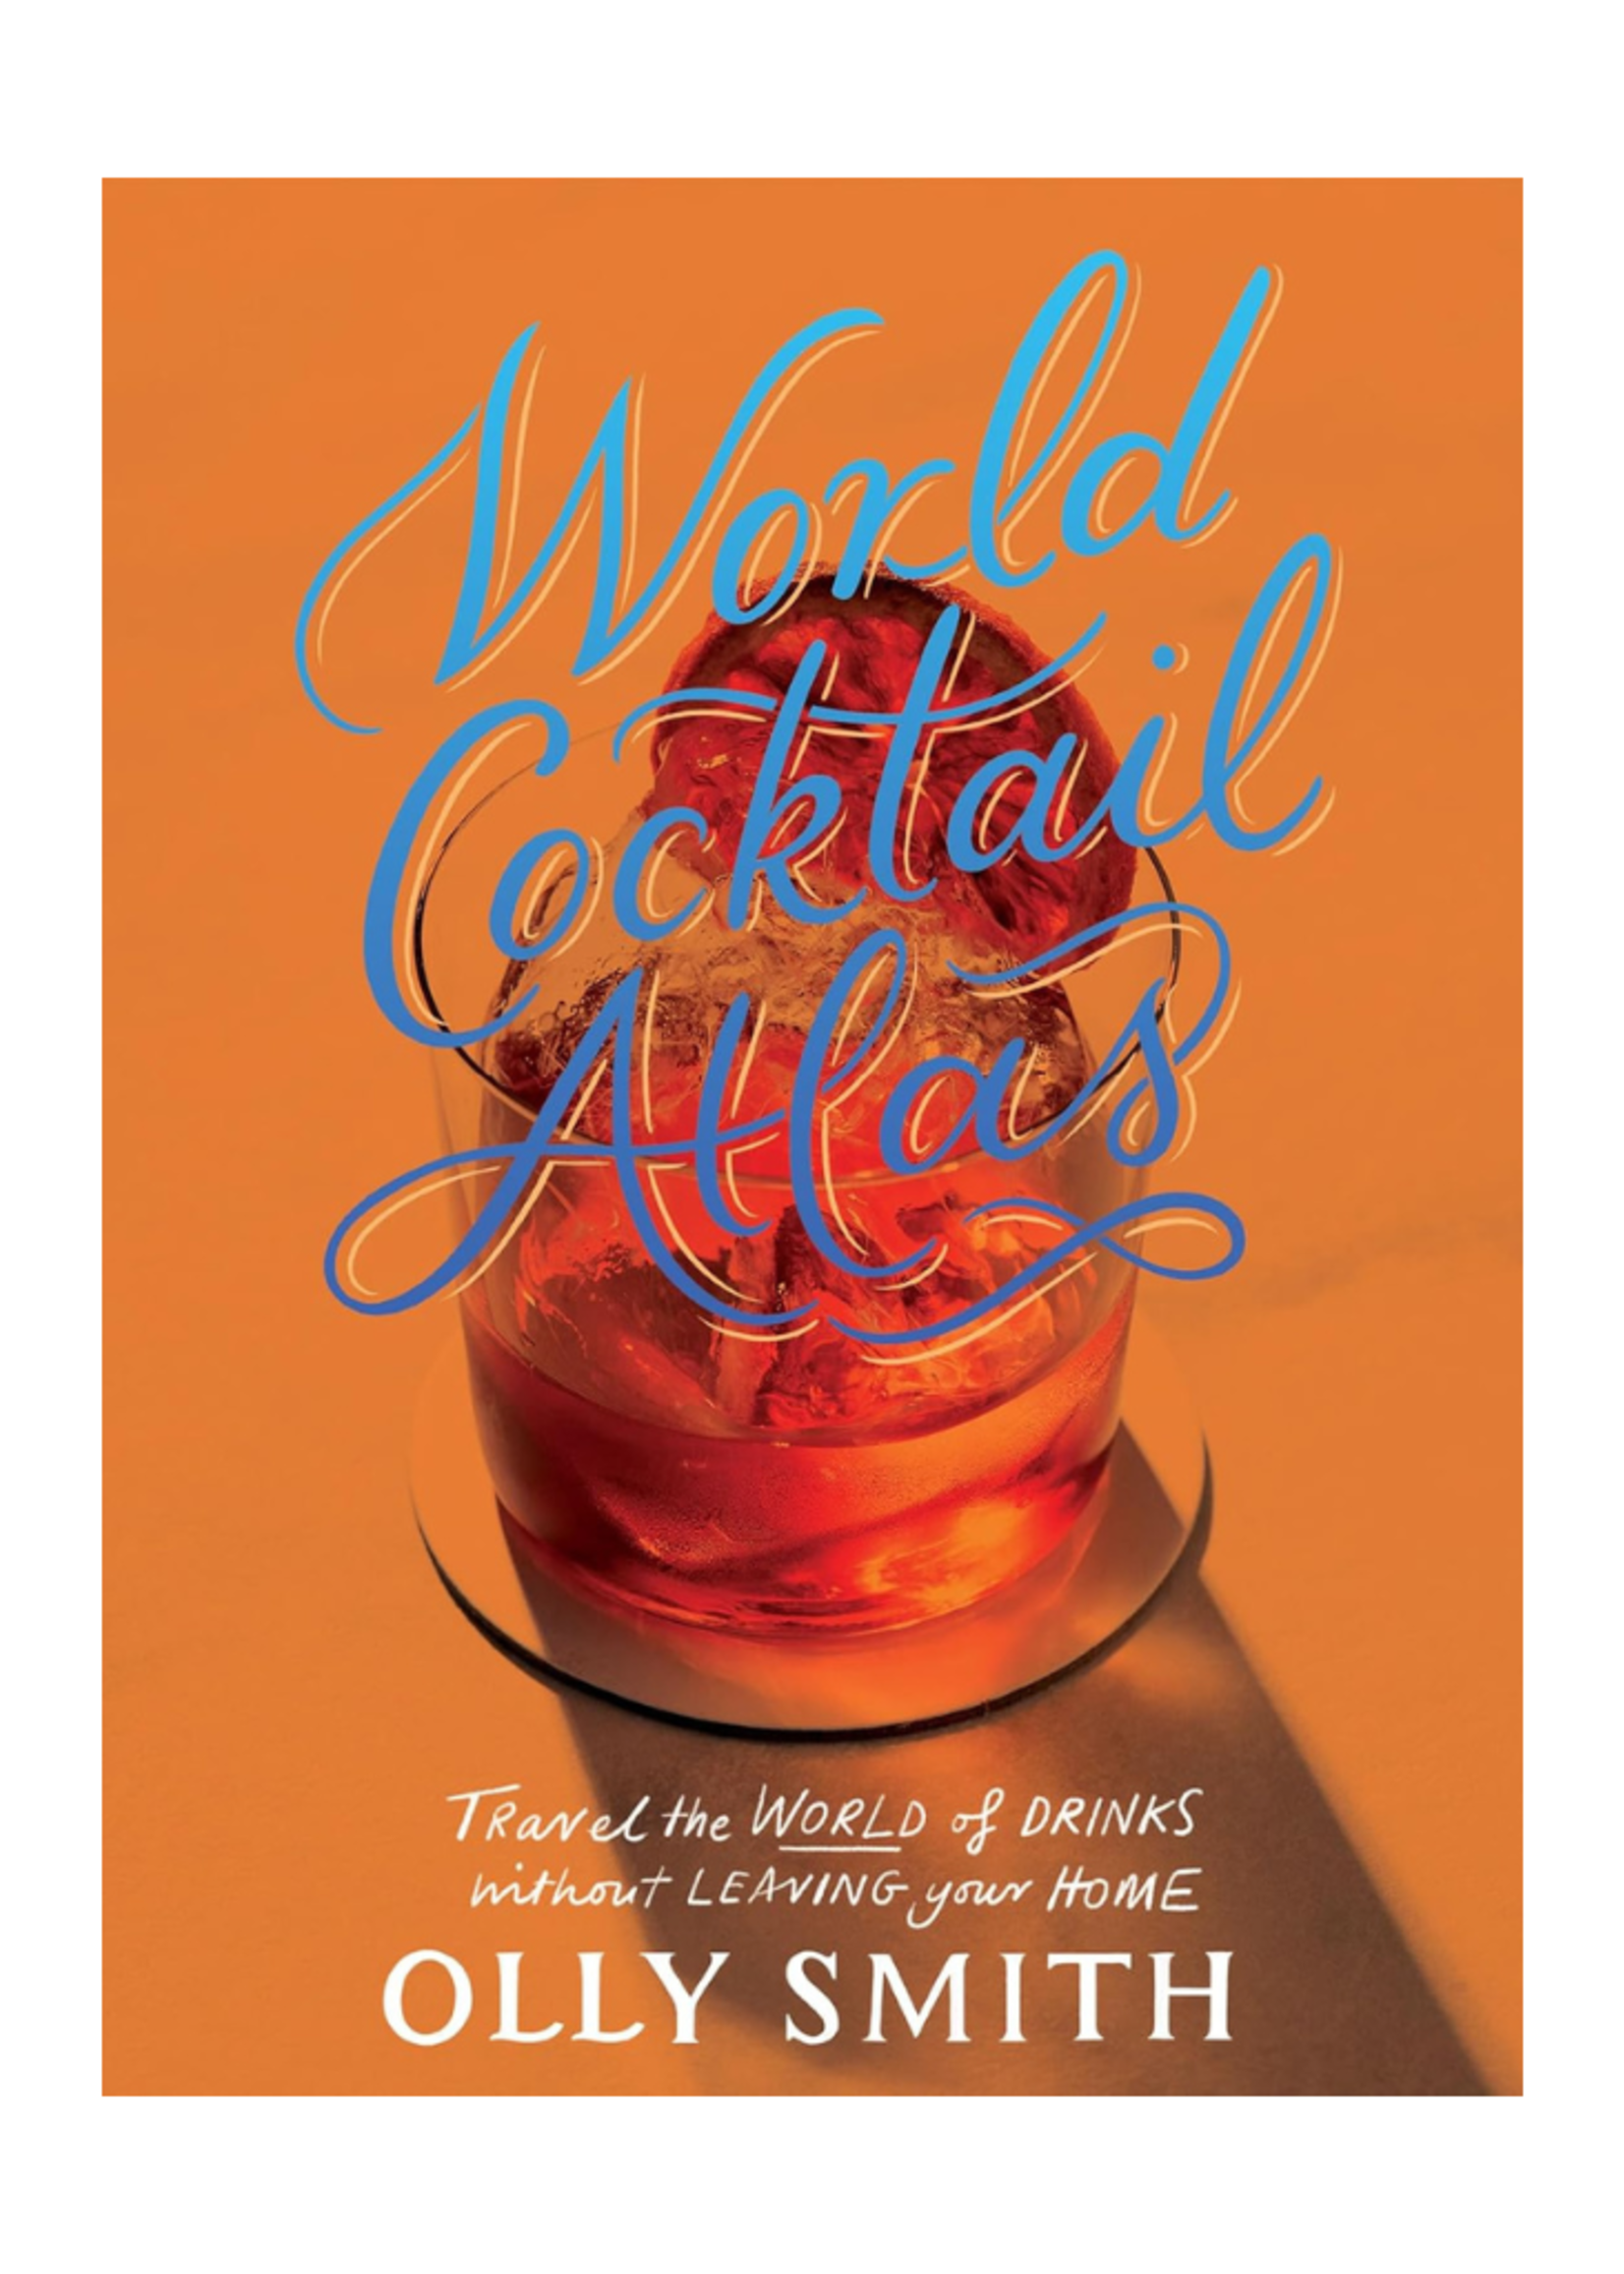 Chronicle Books World Cocktail Atlas: Travel the World of Drinks Without Leaving Home - Over 230 Cocktail Recipes by Olly Smith